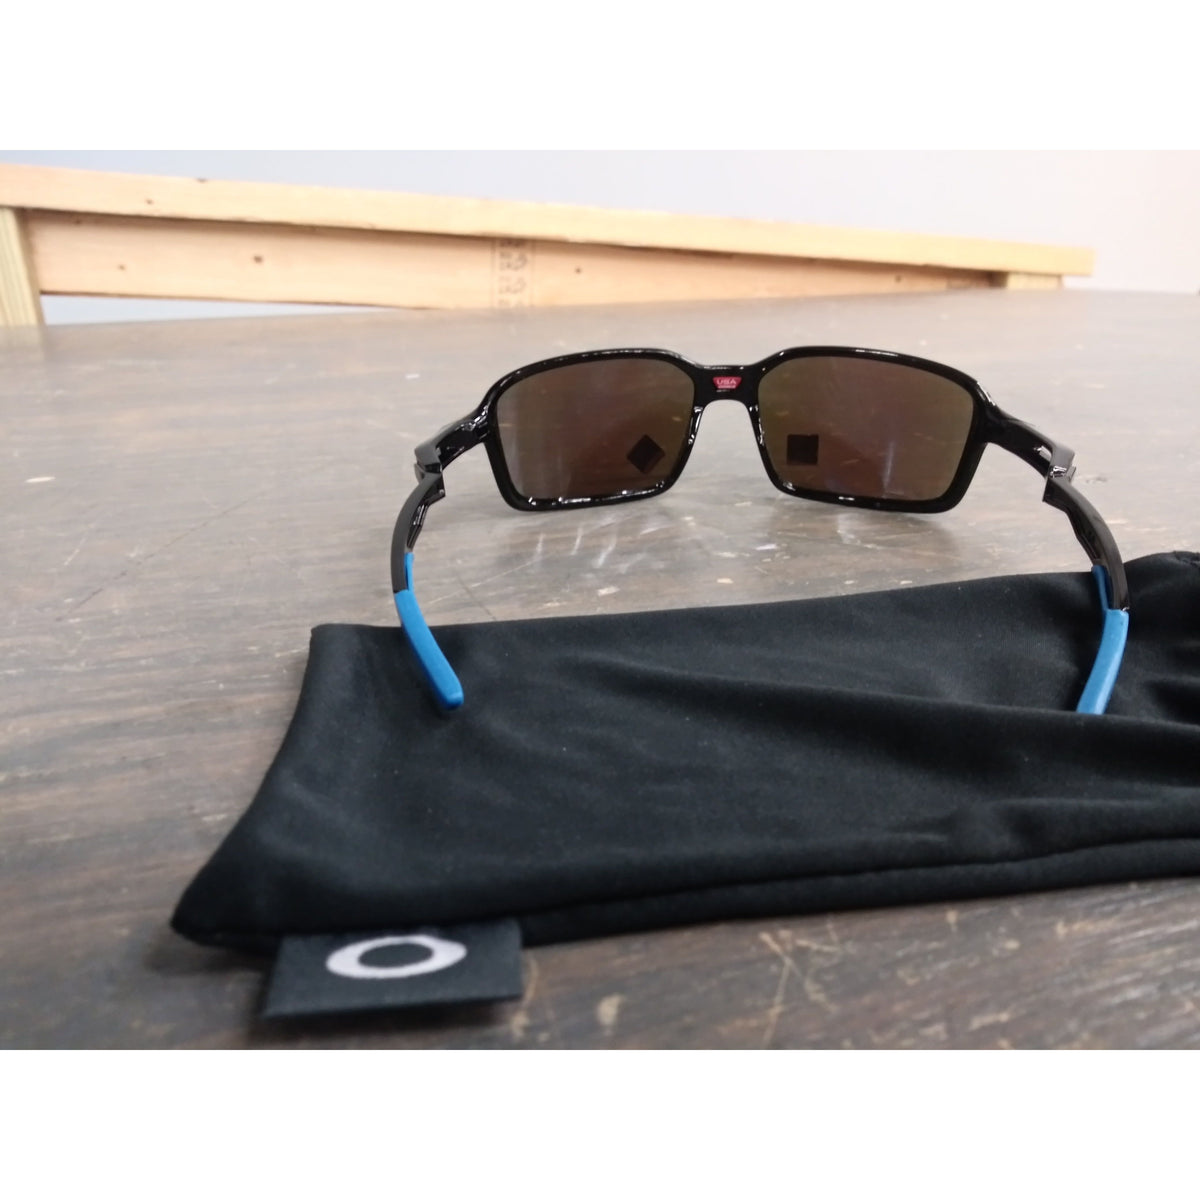 Oakley Siphon Sunglasses - Polished Black; Prizm Sapphire - Used - Acceptable